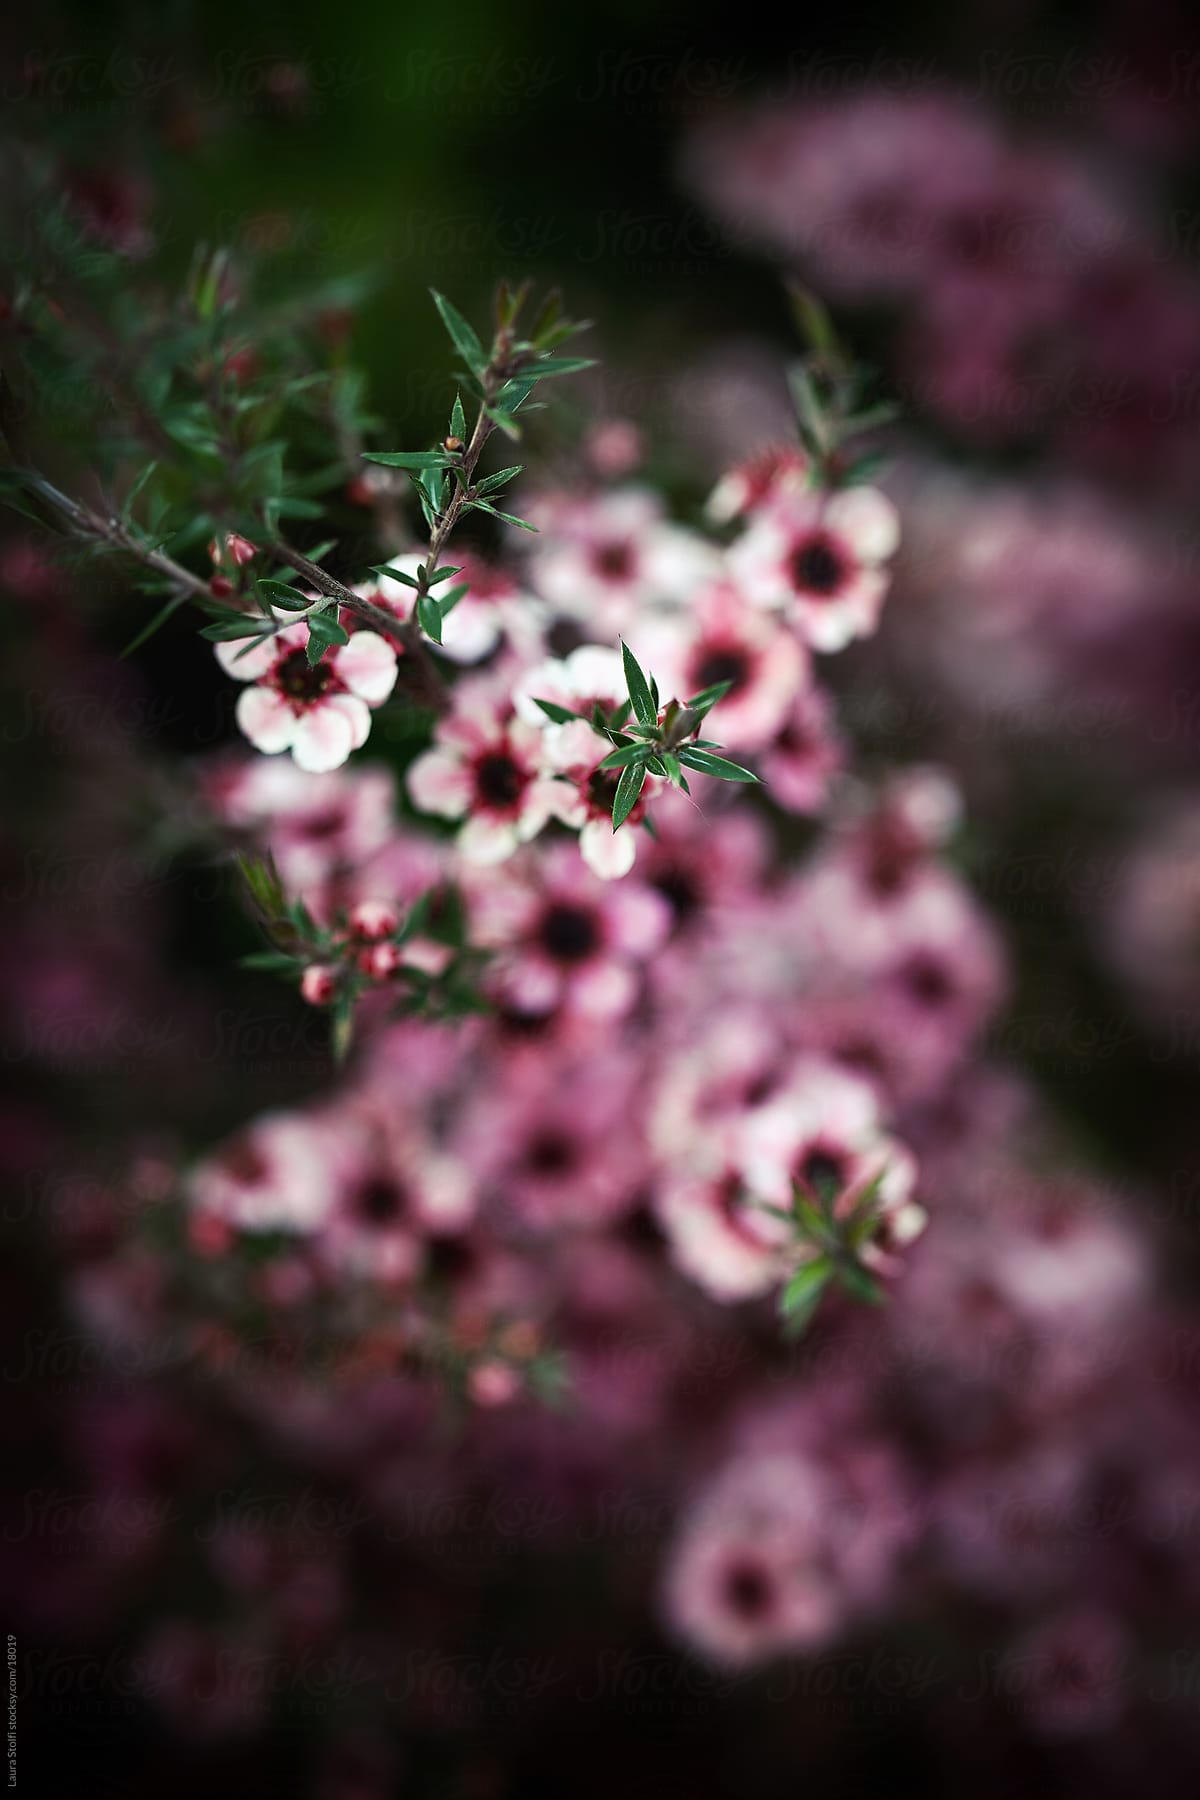 Pink Leptospermum (tea tree) in bloom seen from above with focus on green leaves and blurred flowers